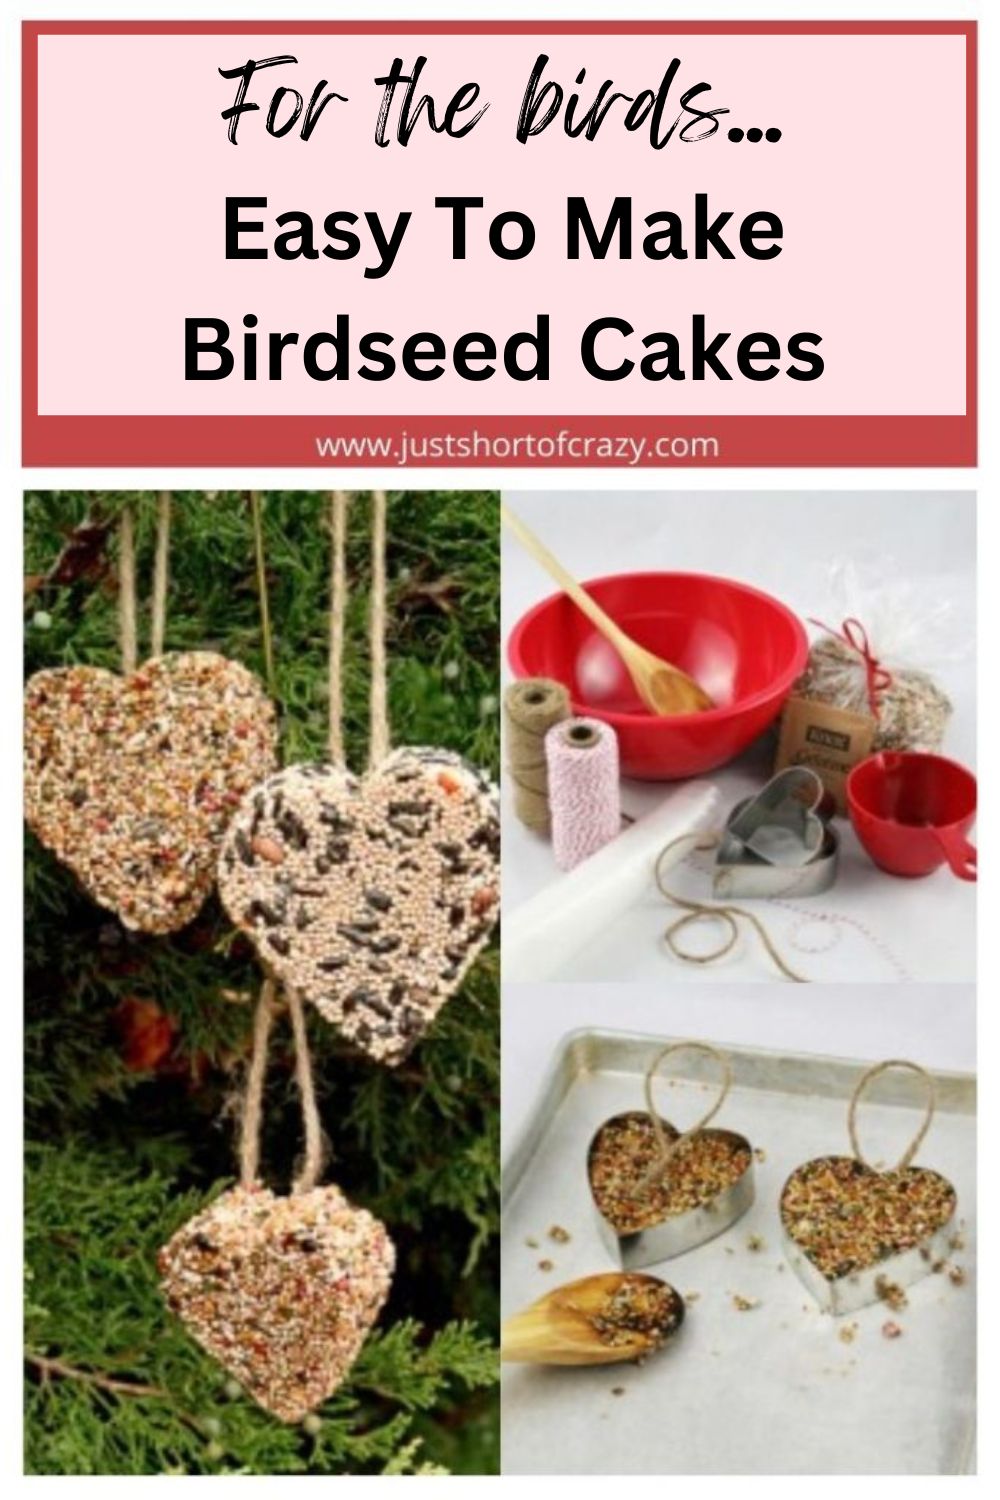 Guest Post – Homemade bird seed cakes - Emmy's Mummy